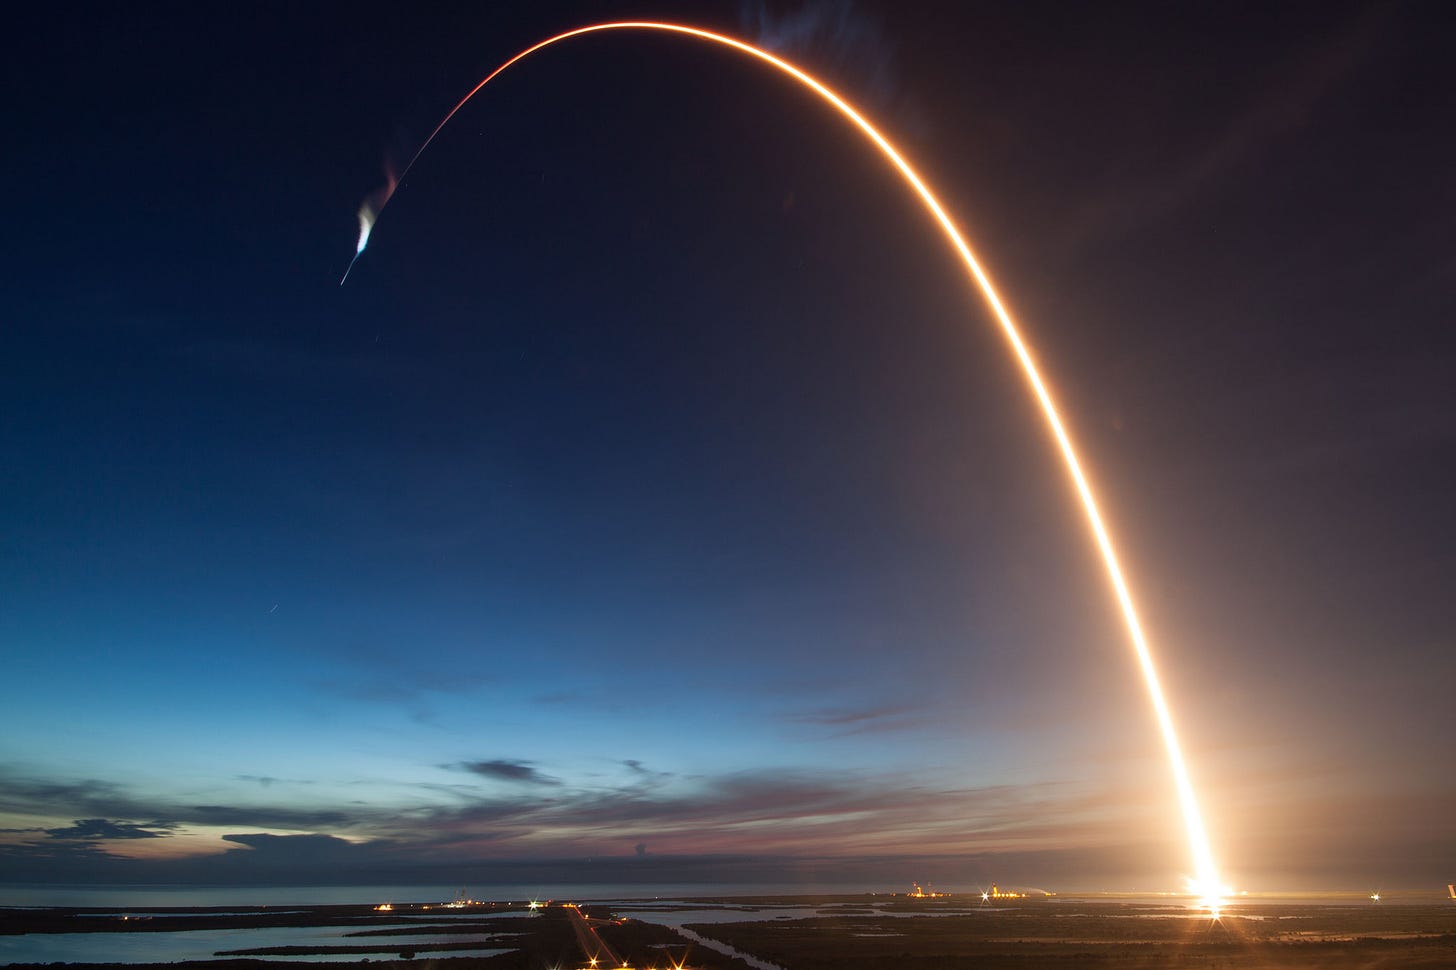 SpaceX's Falcon 9 Rocket Launches Dragon to the Space Station | NASA